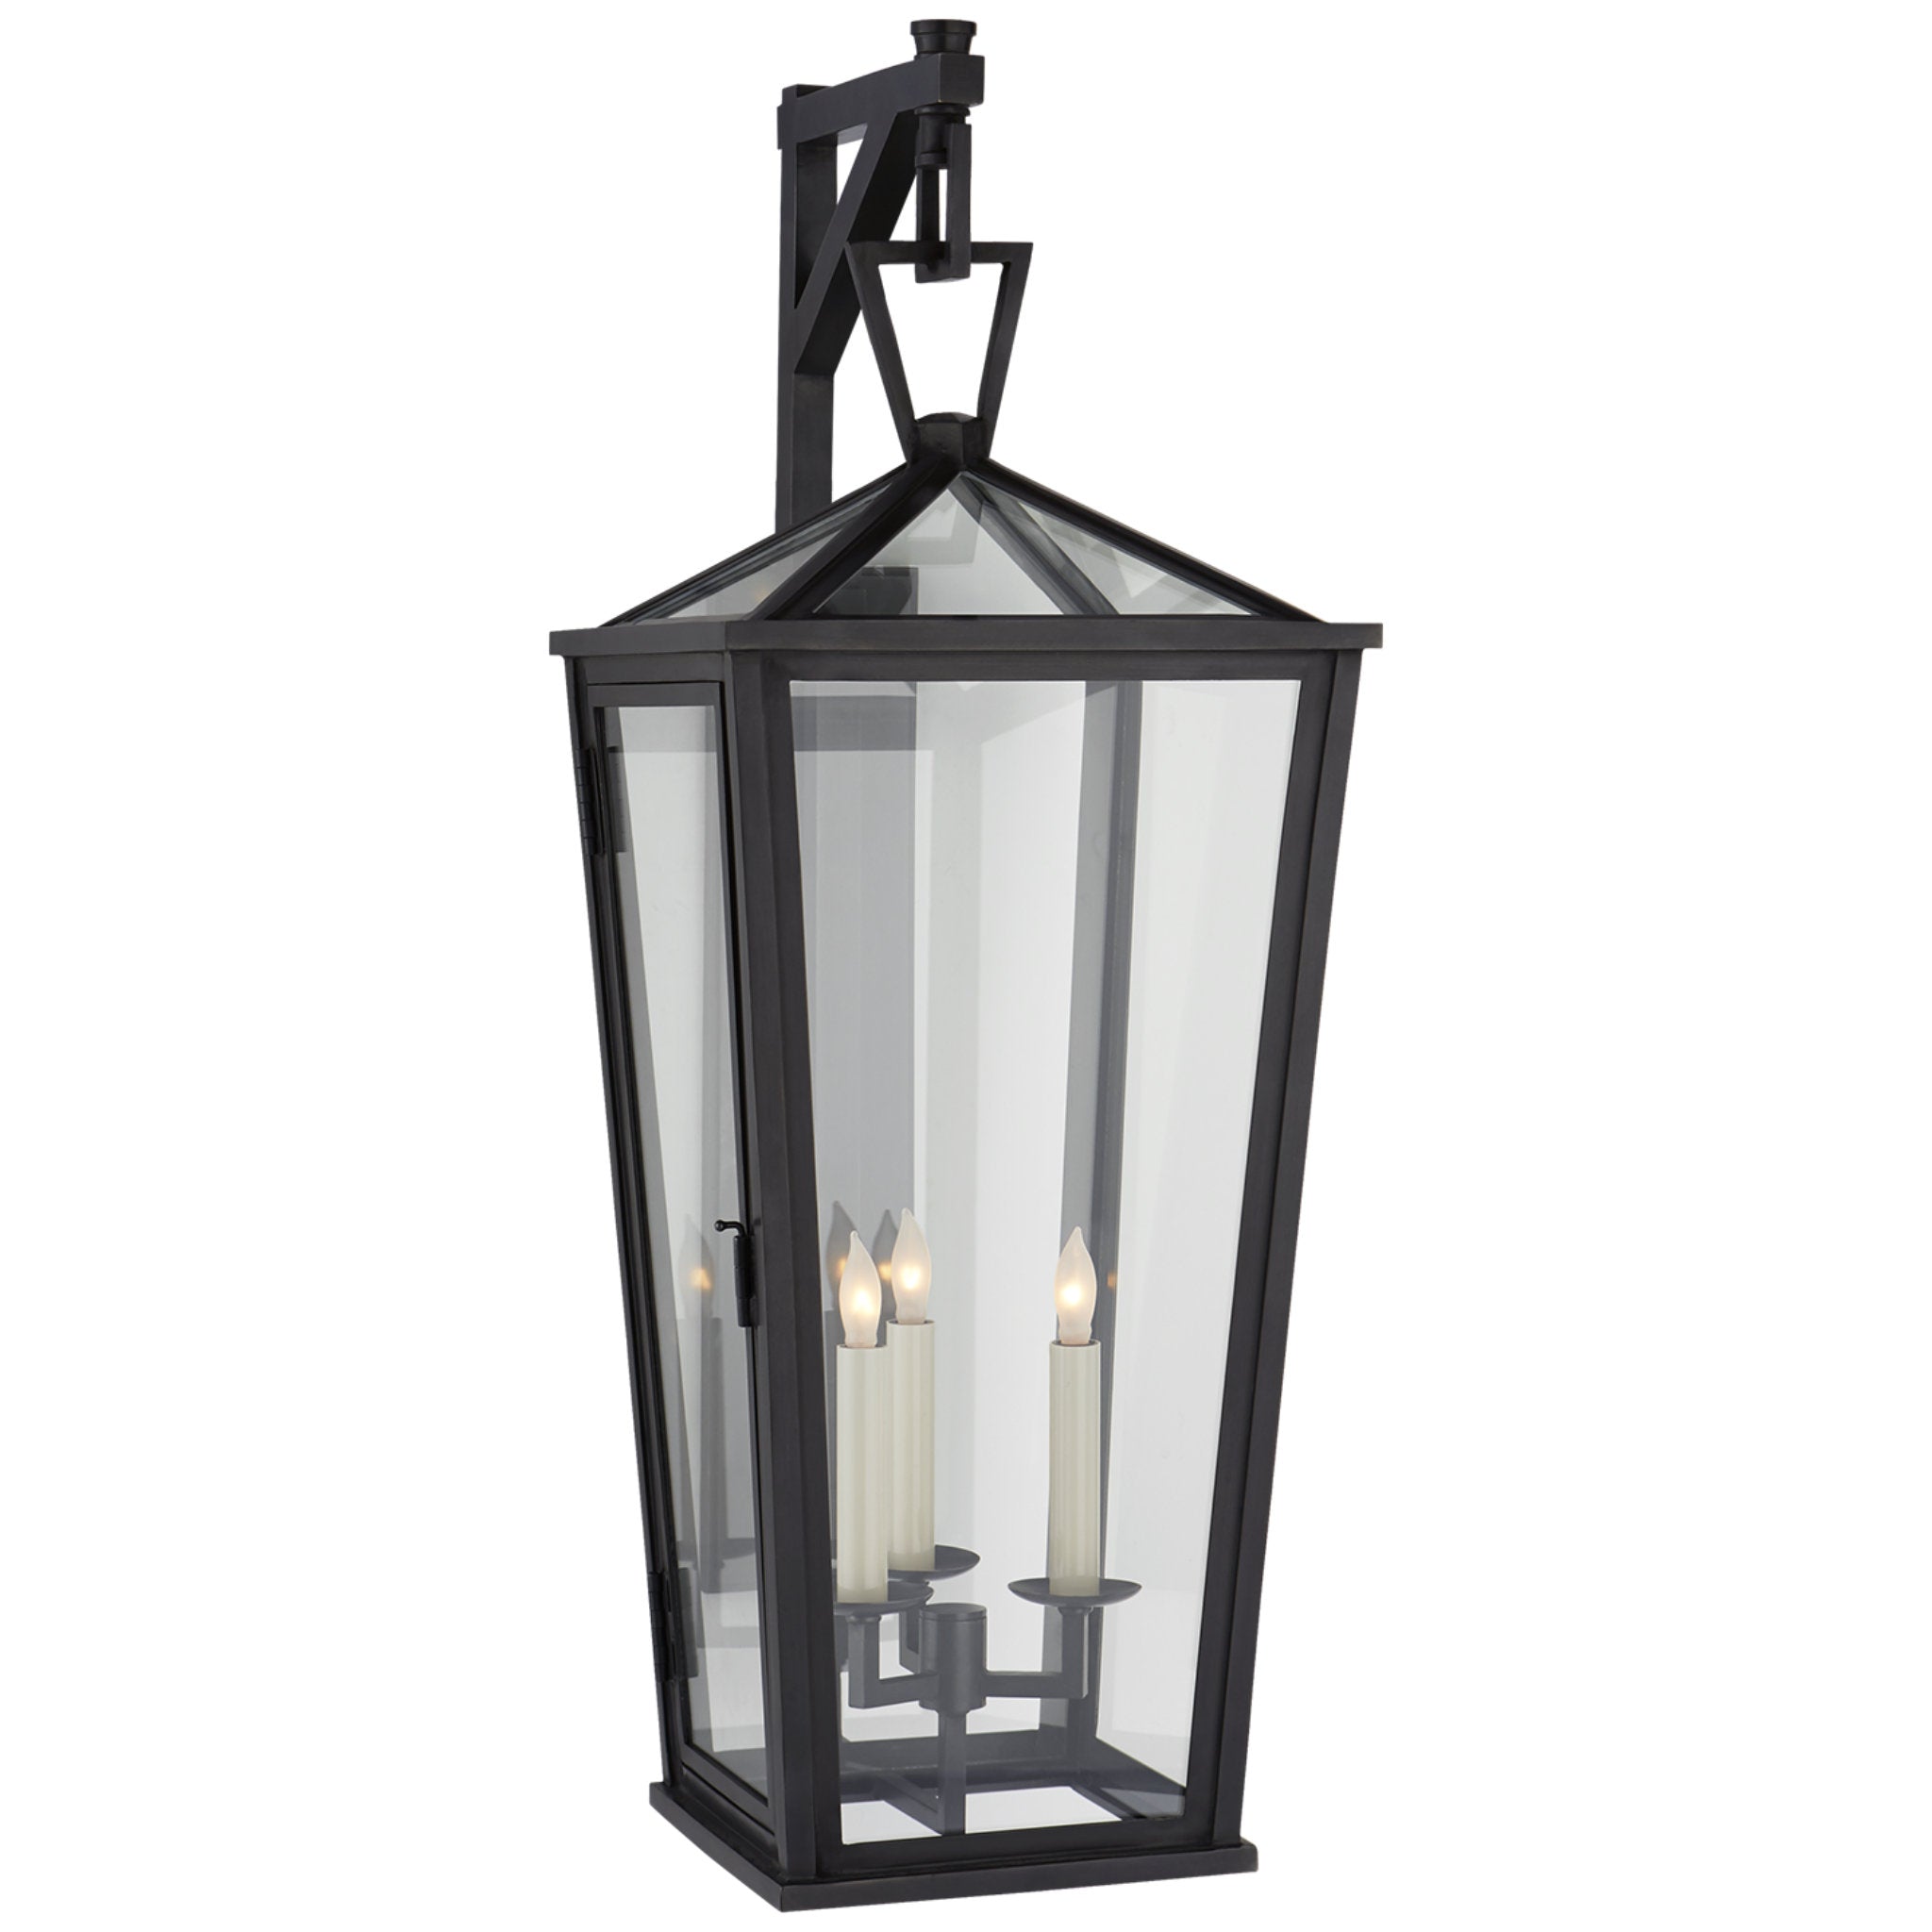 Chapman & Myers Darlana Large Tall Bracketed Wall Lantern in Bronze with Clear Glass